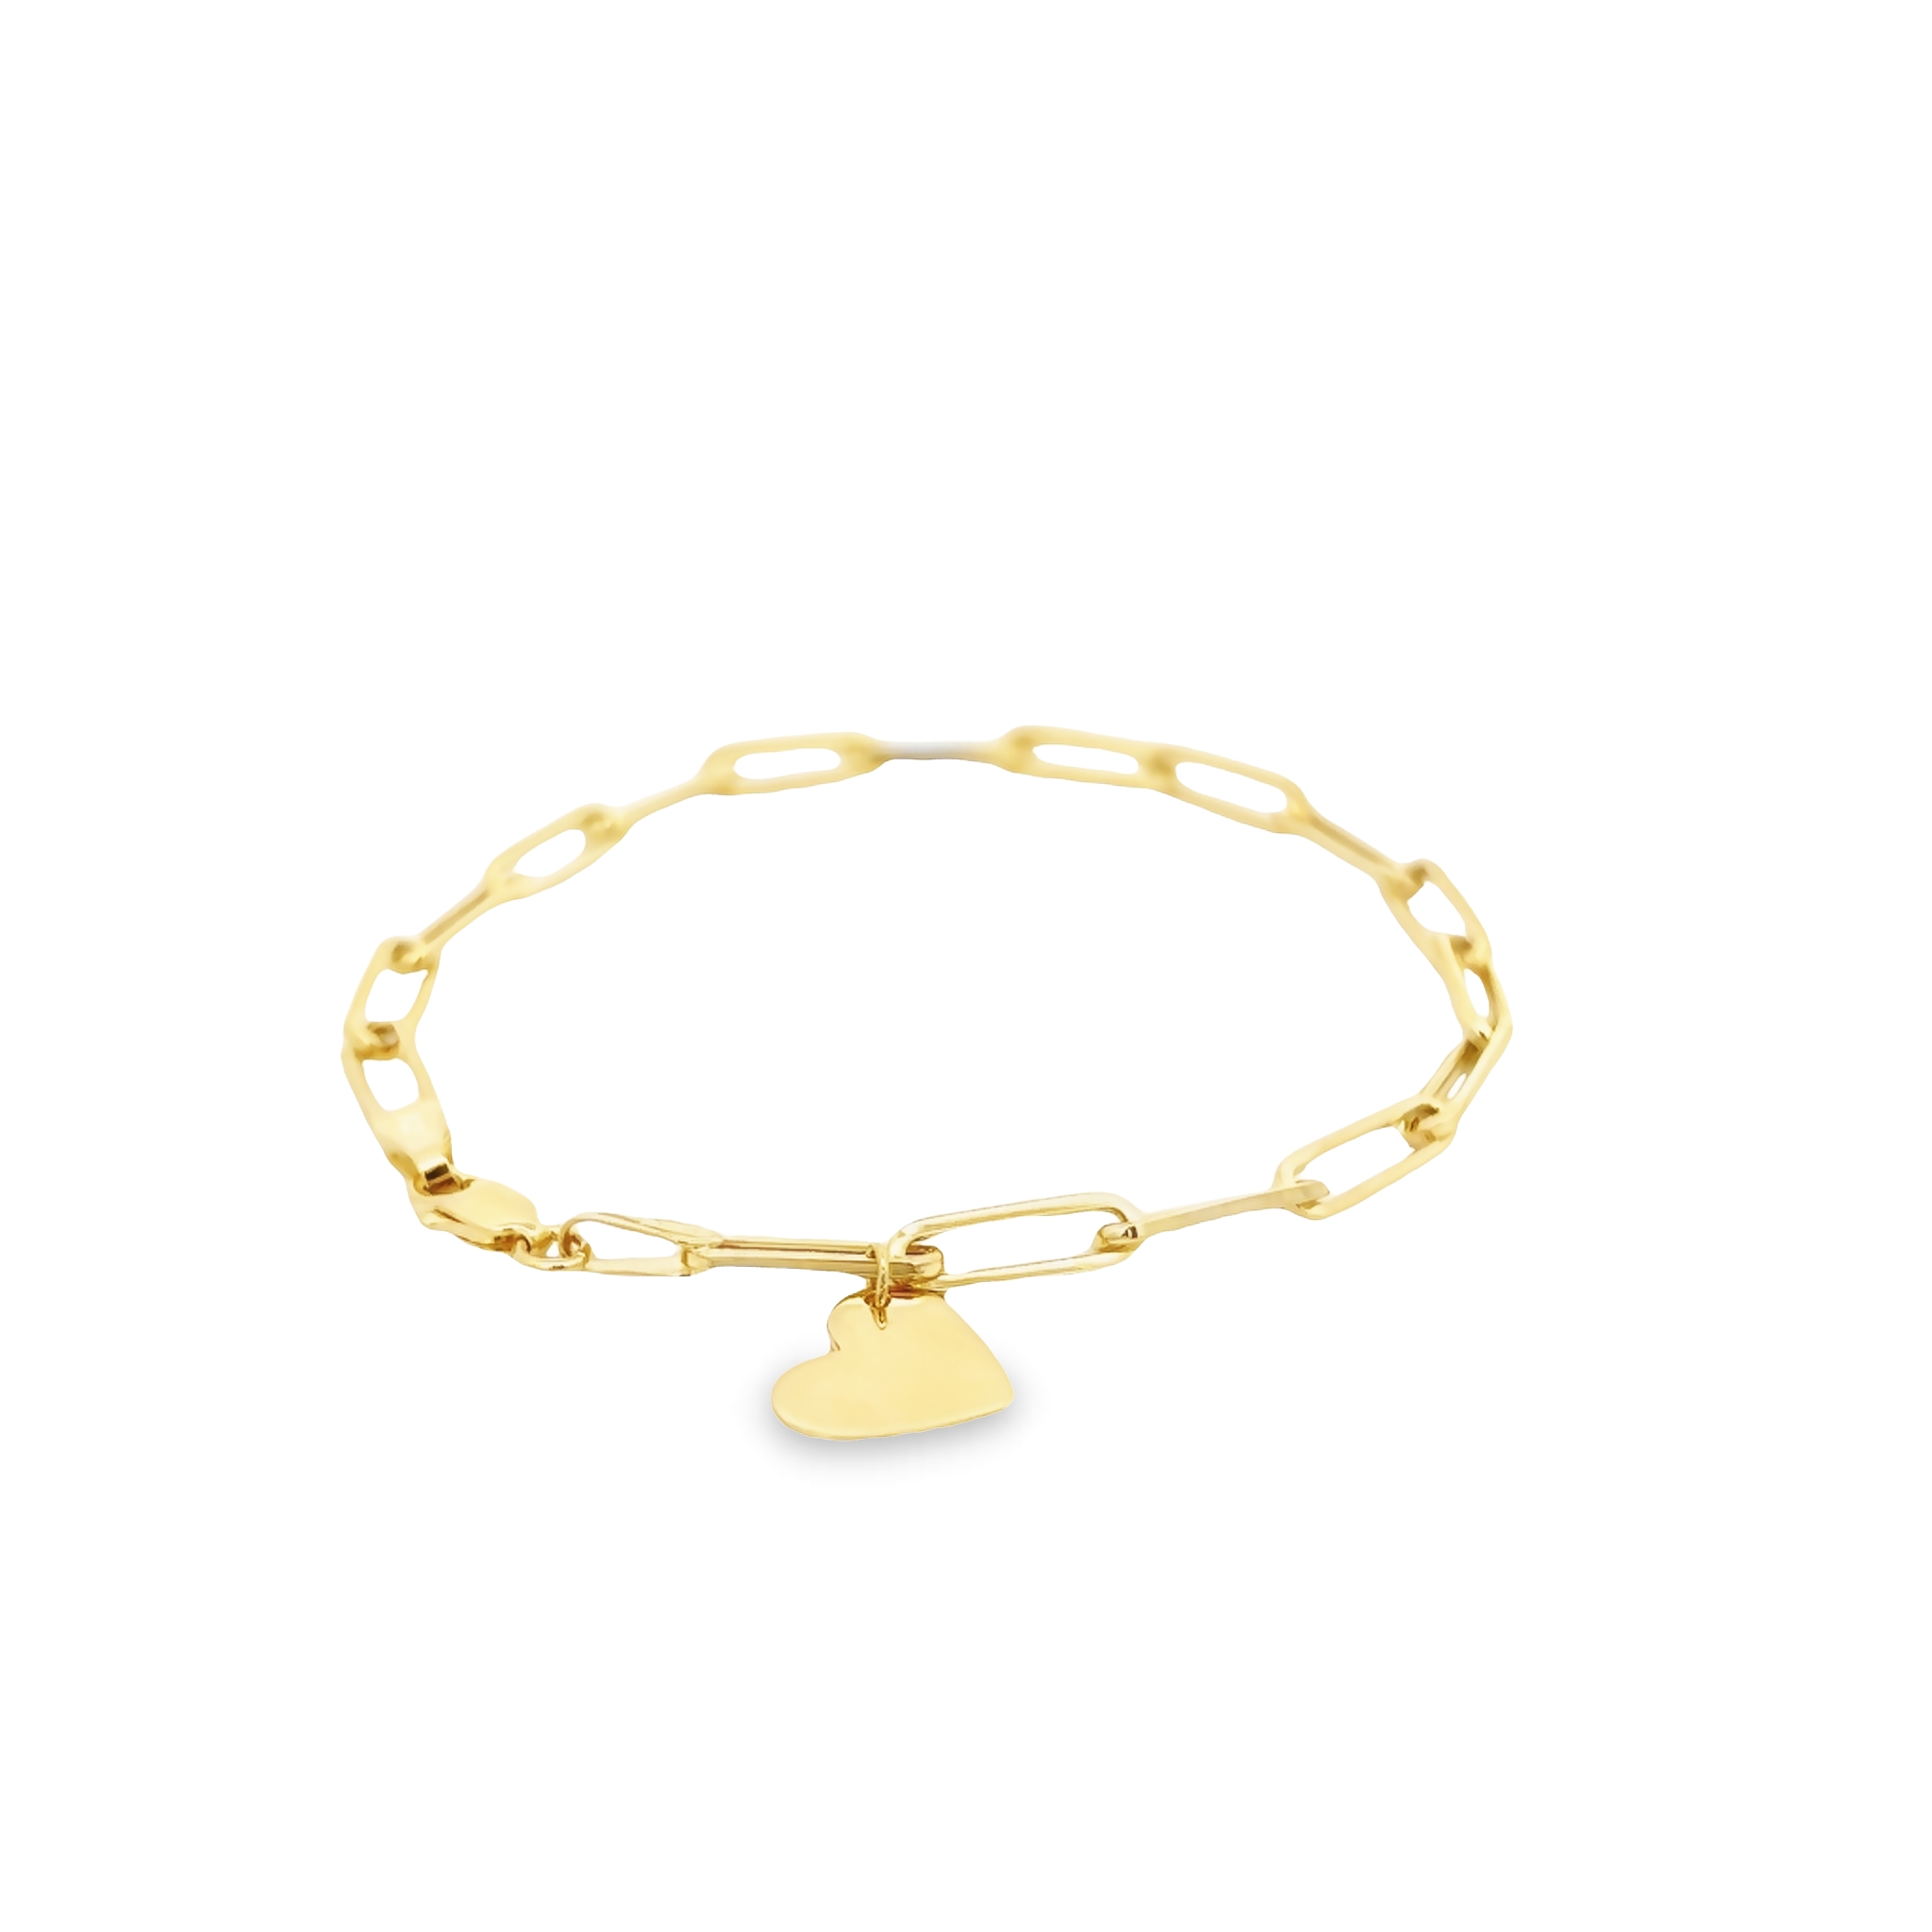 14 Karat Yellow Gold Paperclip Bracelet With Heart Charm.